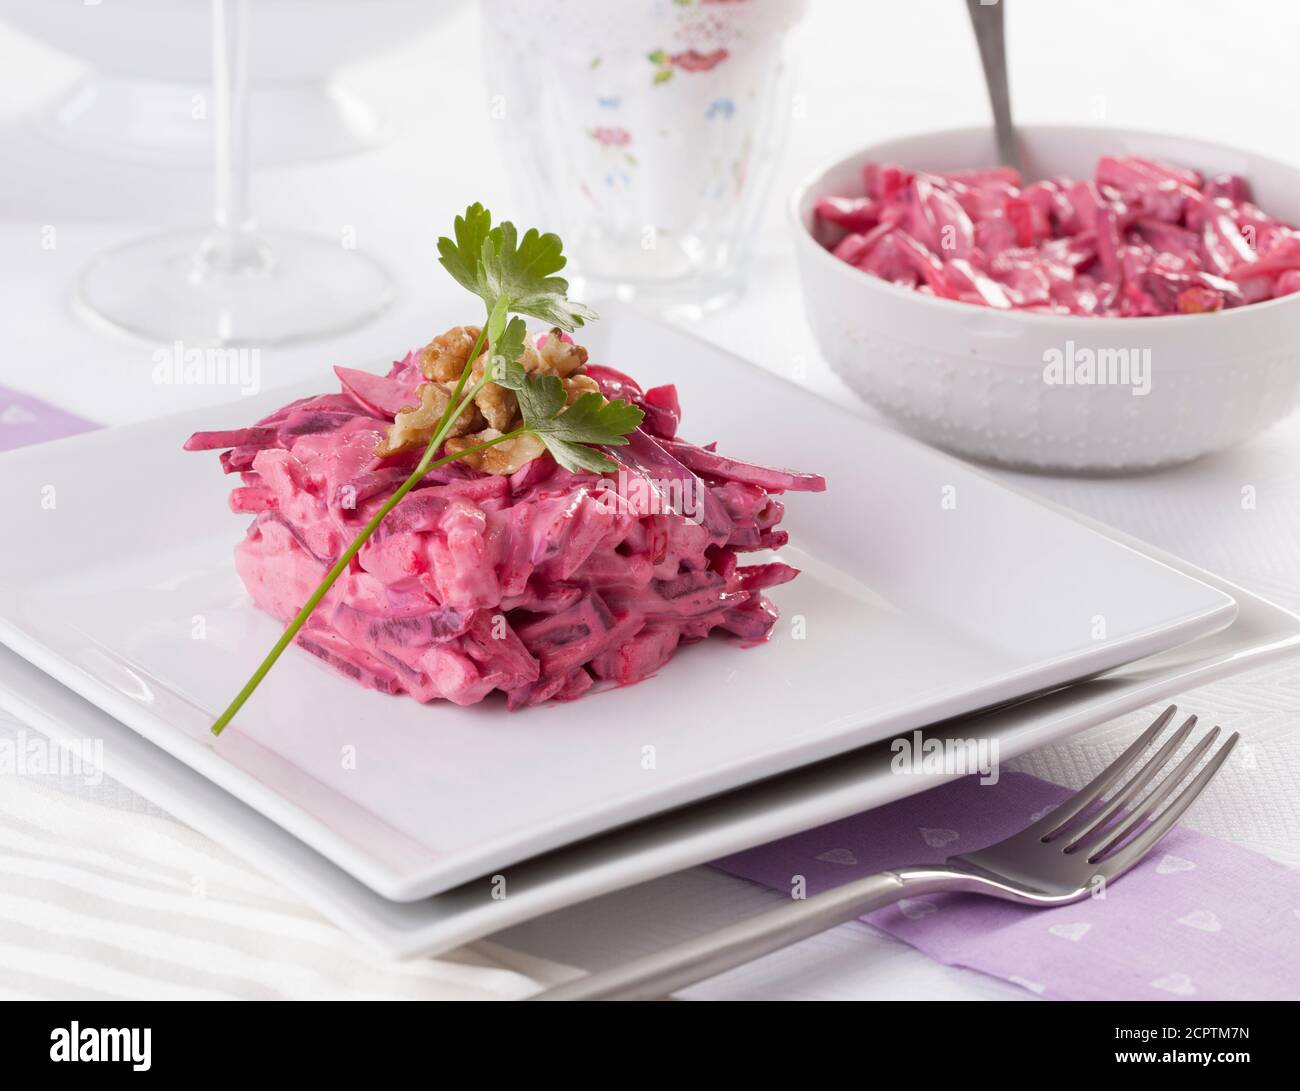 Beetroot salad served with walnuts and parsley. Stock Photo